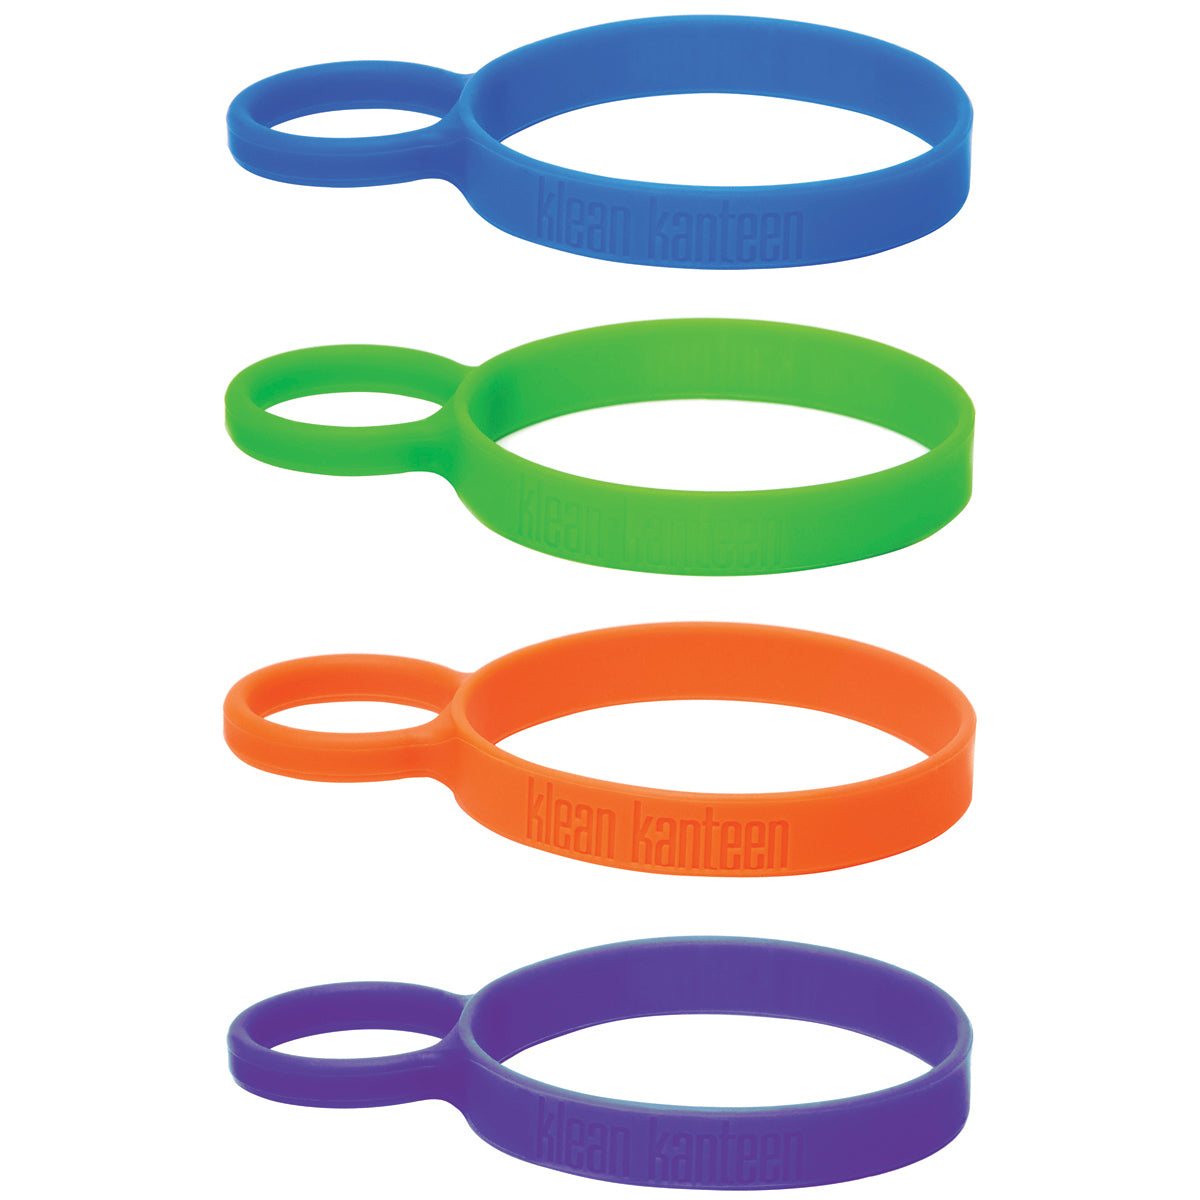 Klean Kanteen Four Pack of Silicone Pint Cup Rings - Multi-Color Klean Kanteen